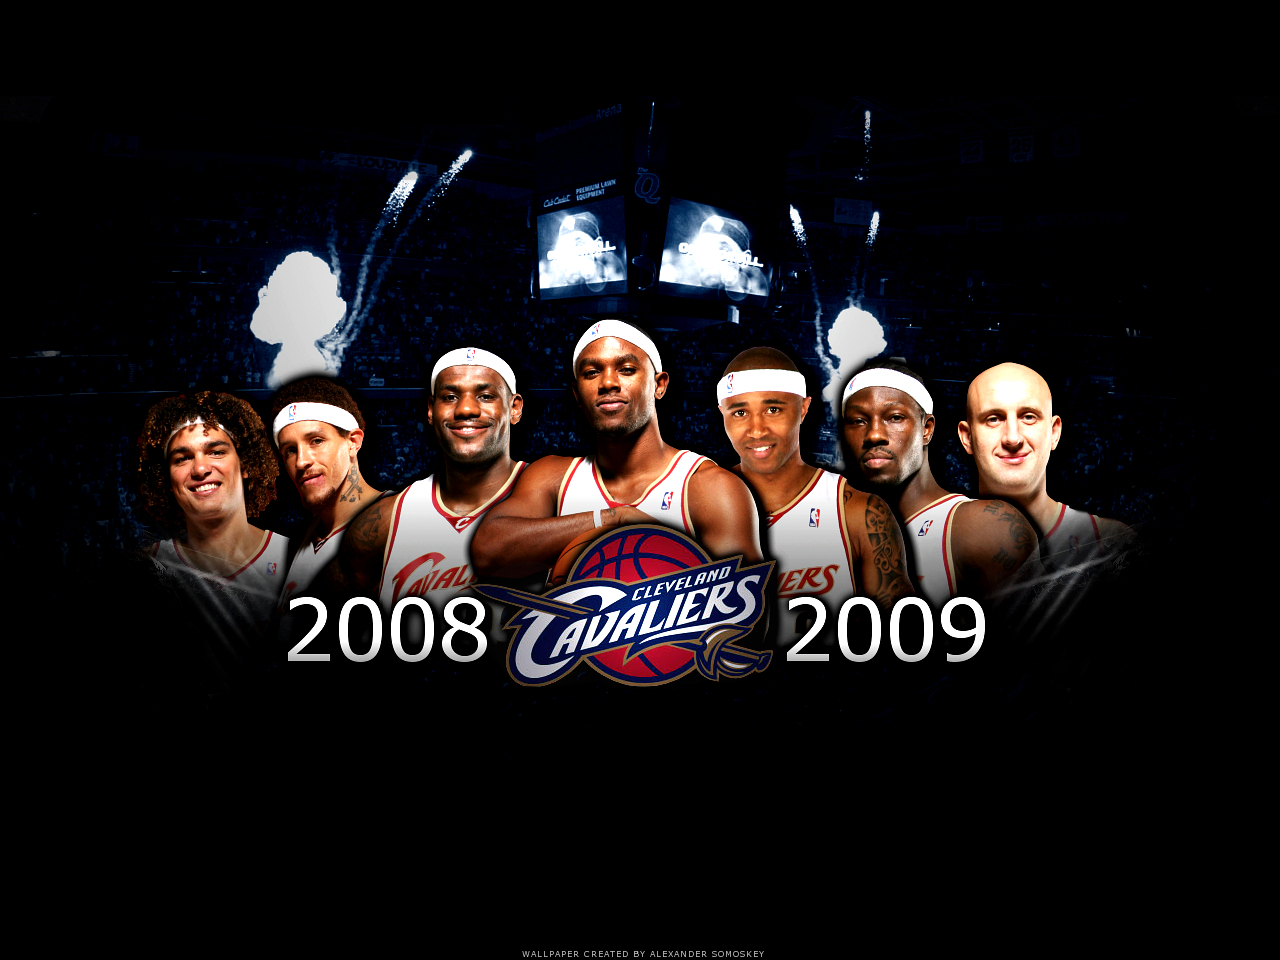 NLSC Forum • The Chosen One Strikes Back: A Cleveland Cavaliers Story1280 x 960